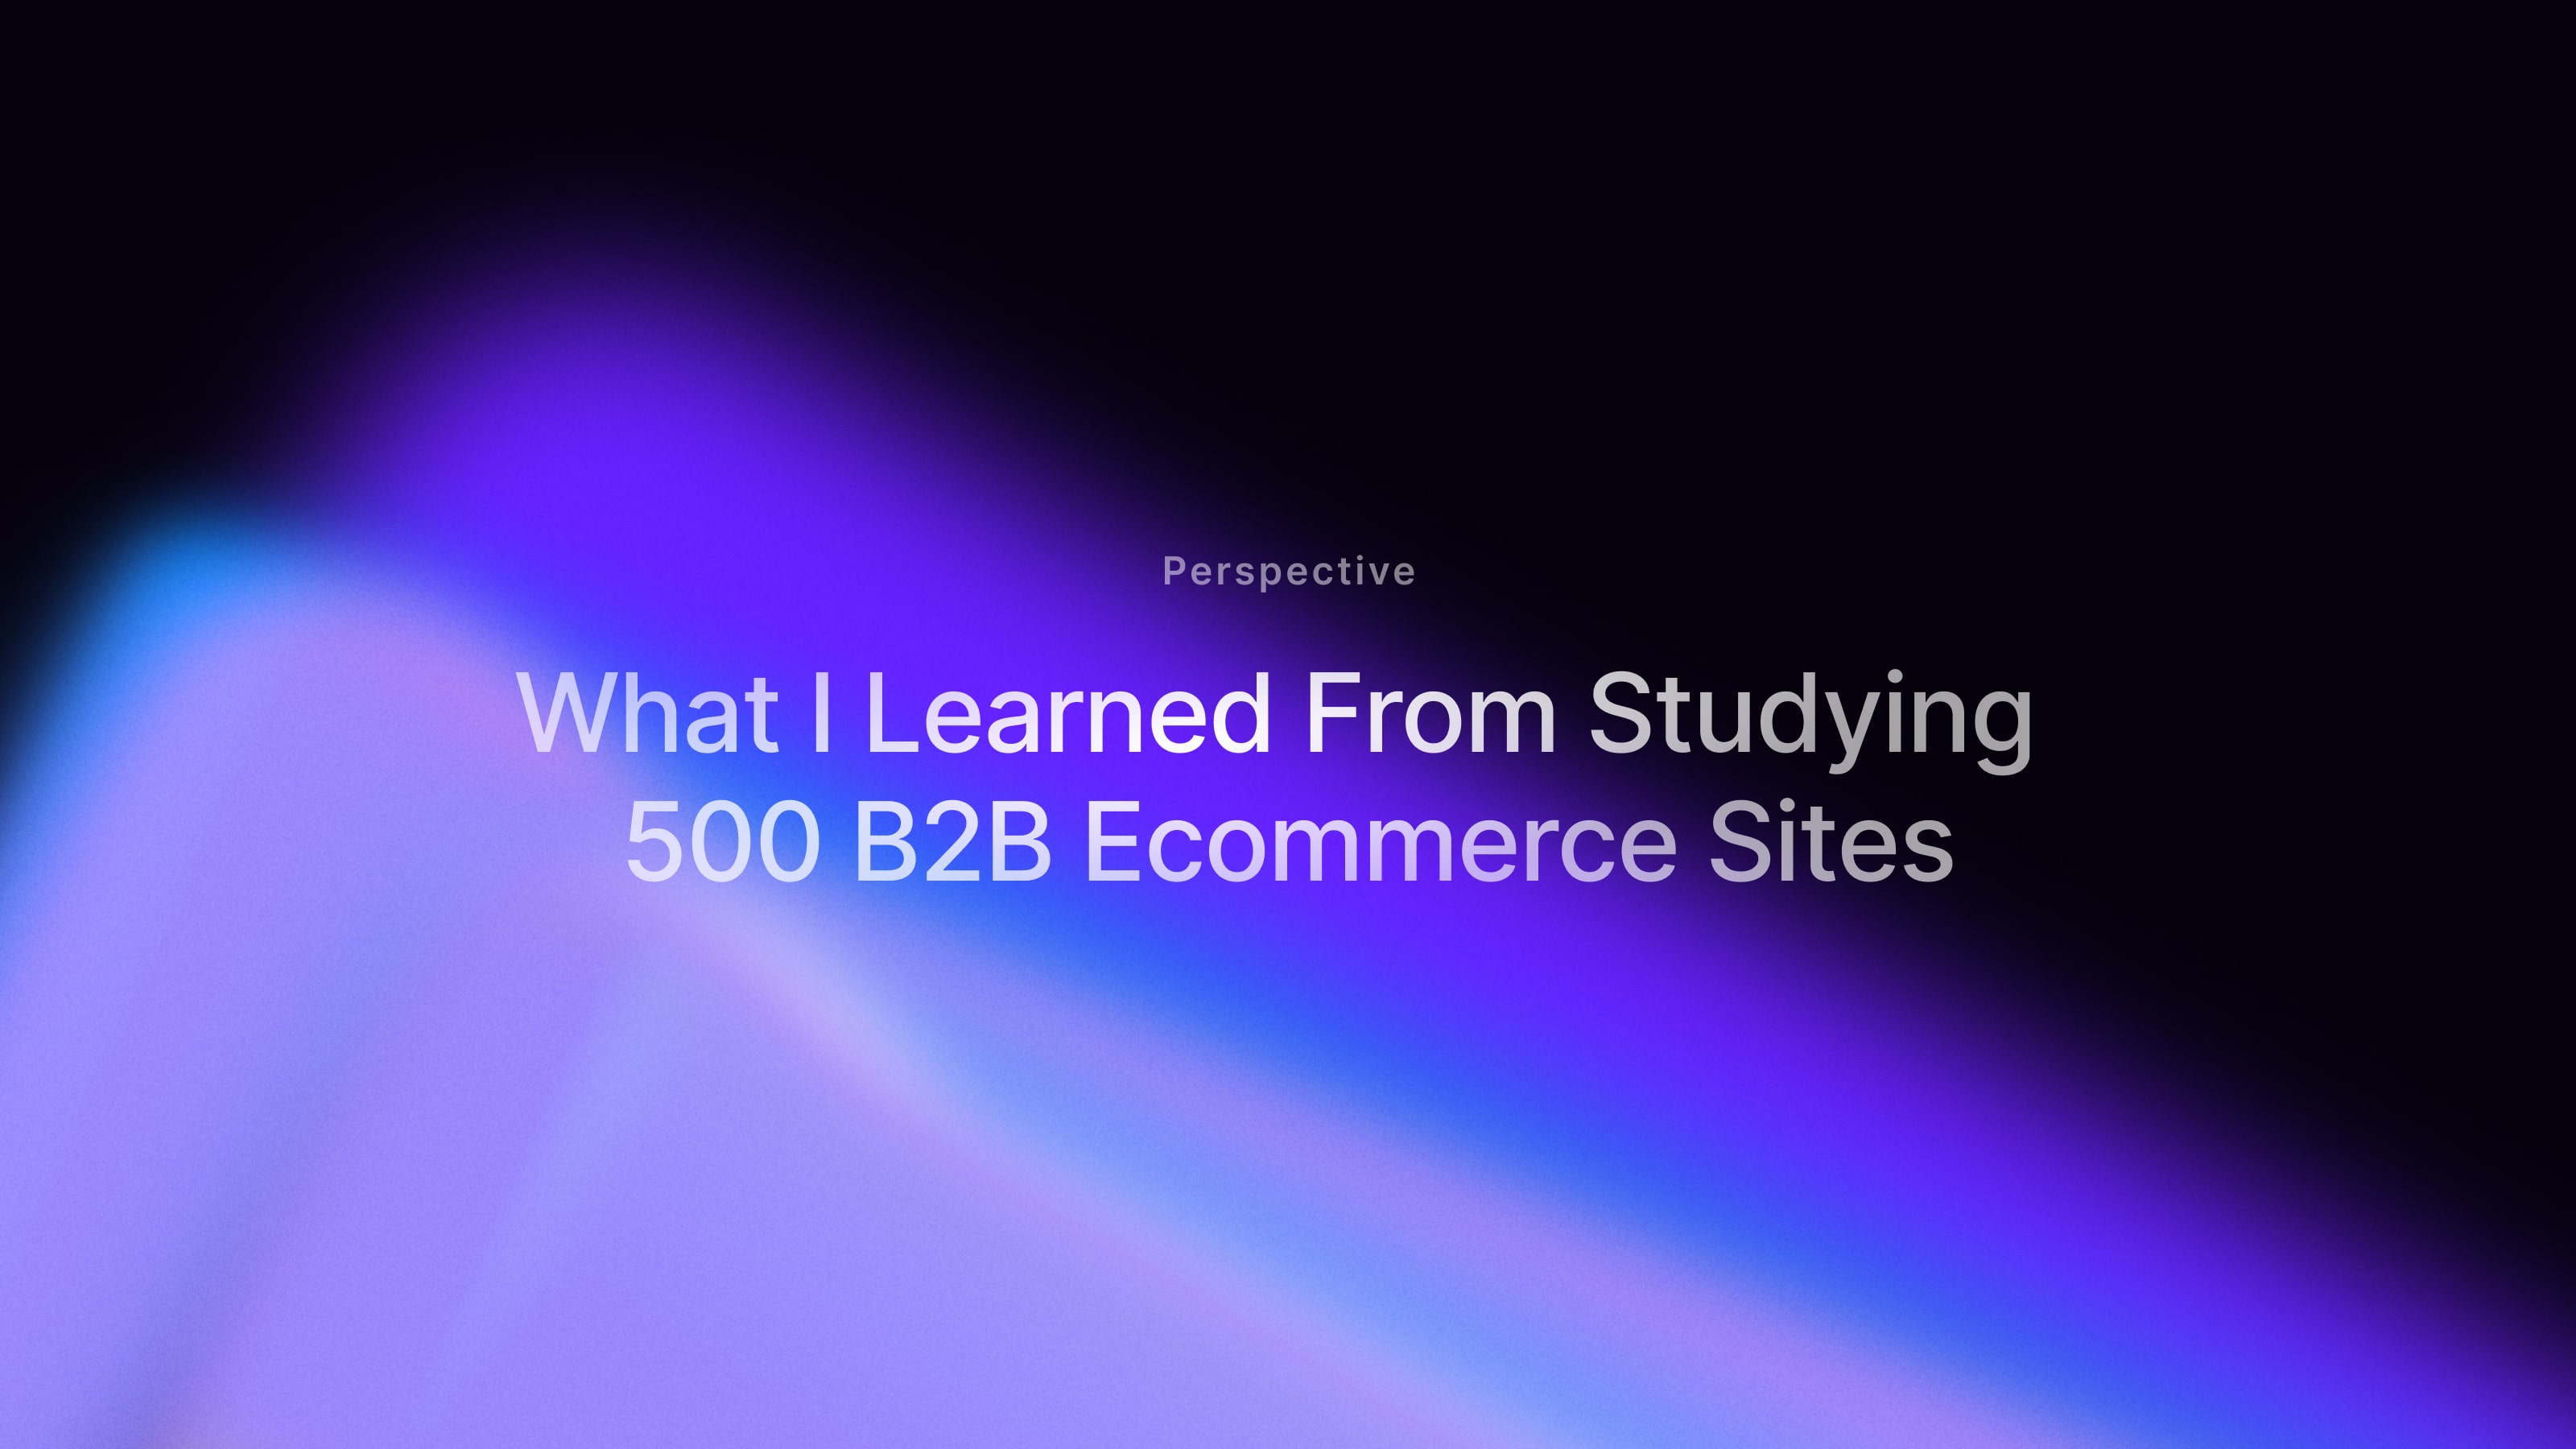 What I Learned From Studying 500 B2B Ecommerce Sites